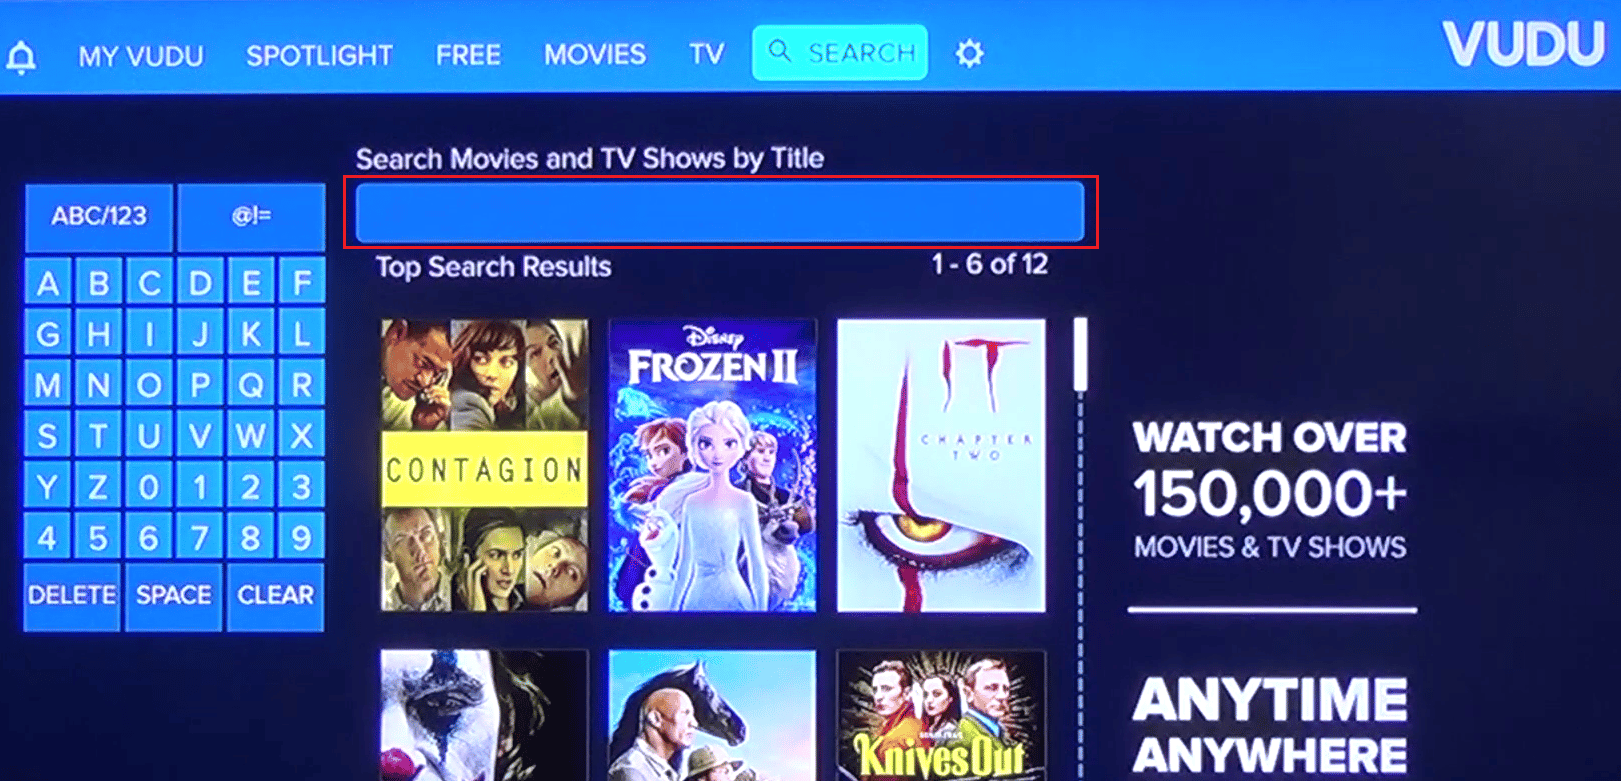 Search for desired movies and hit the LIST option to add them